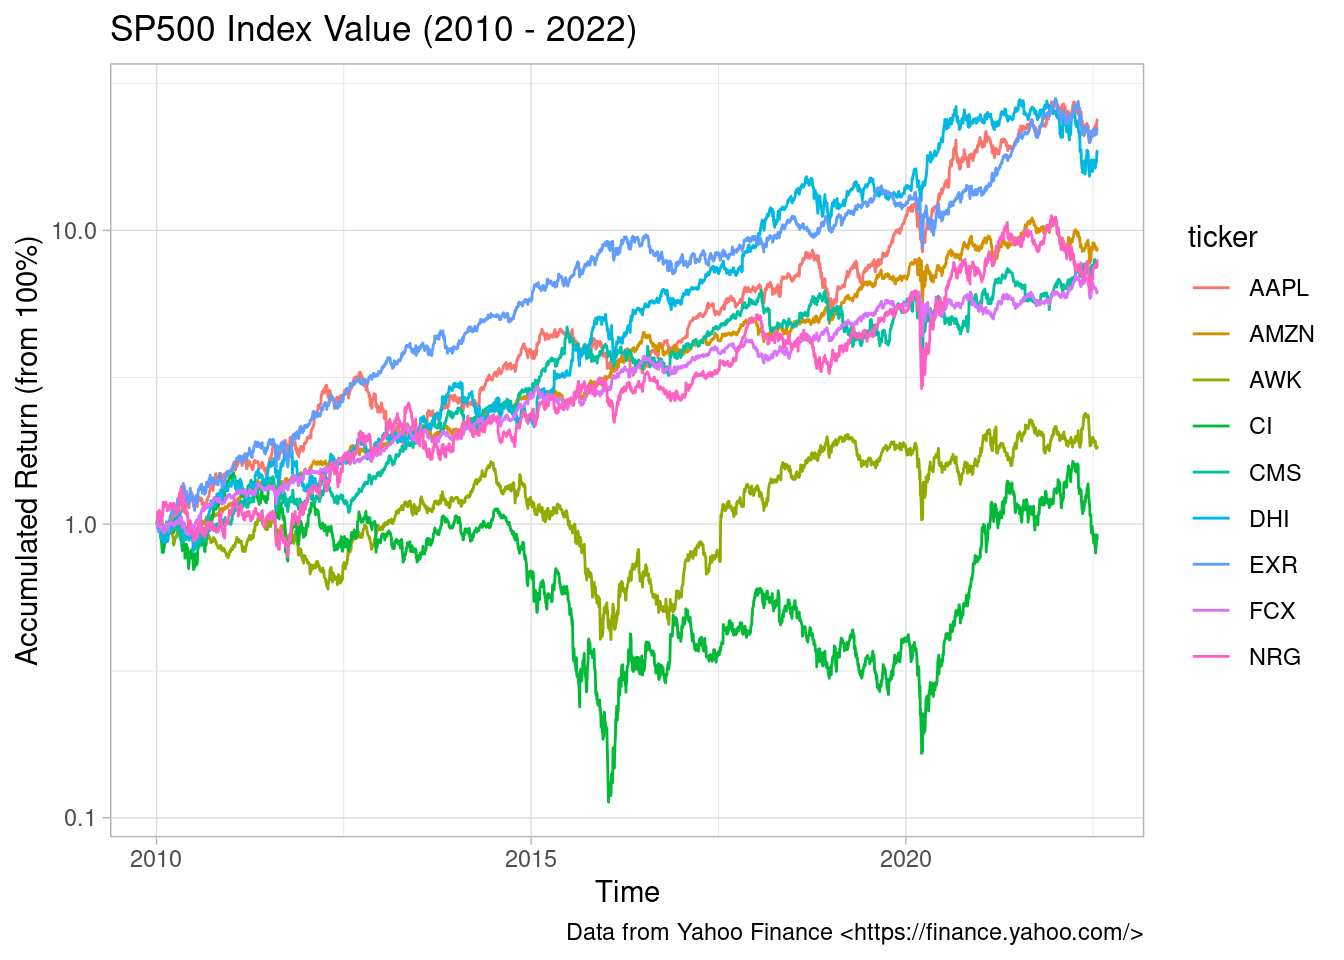 Line graph showing the accumulated returns of 9 stocks on the SP500 index value. The x axis shows time running from 2010 to 2022, while the y axis shows accumulated return (from 100%) ranging from 0.1 to > 10 on a log scale. Three stocks show sharply increasing patterns, four show moderately increasing patterns and two show fluctuating horizontal trends.